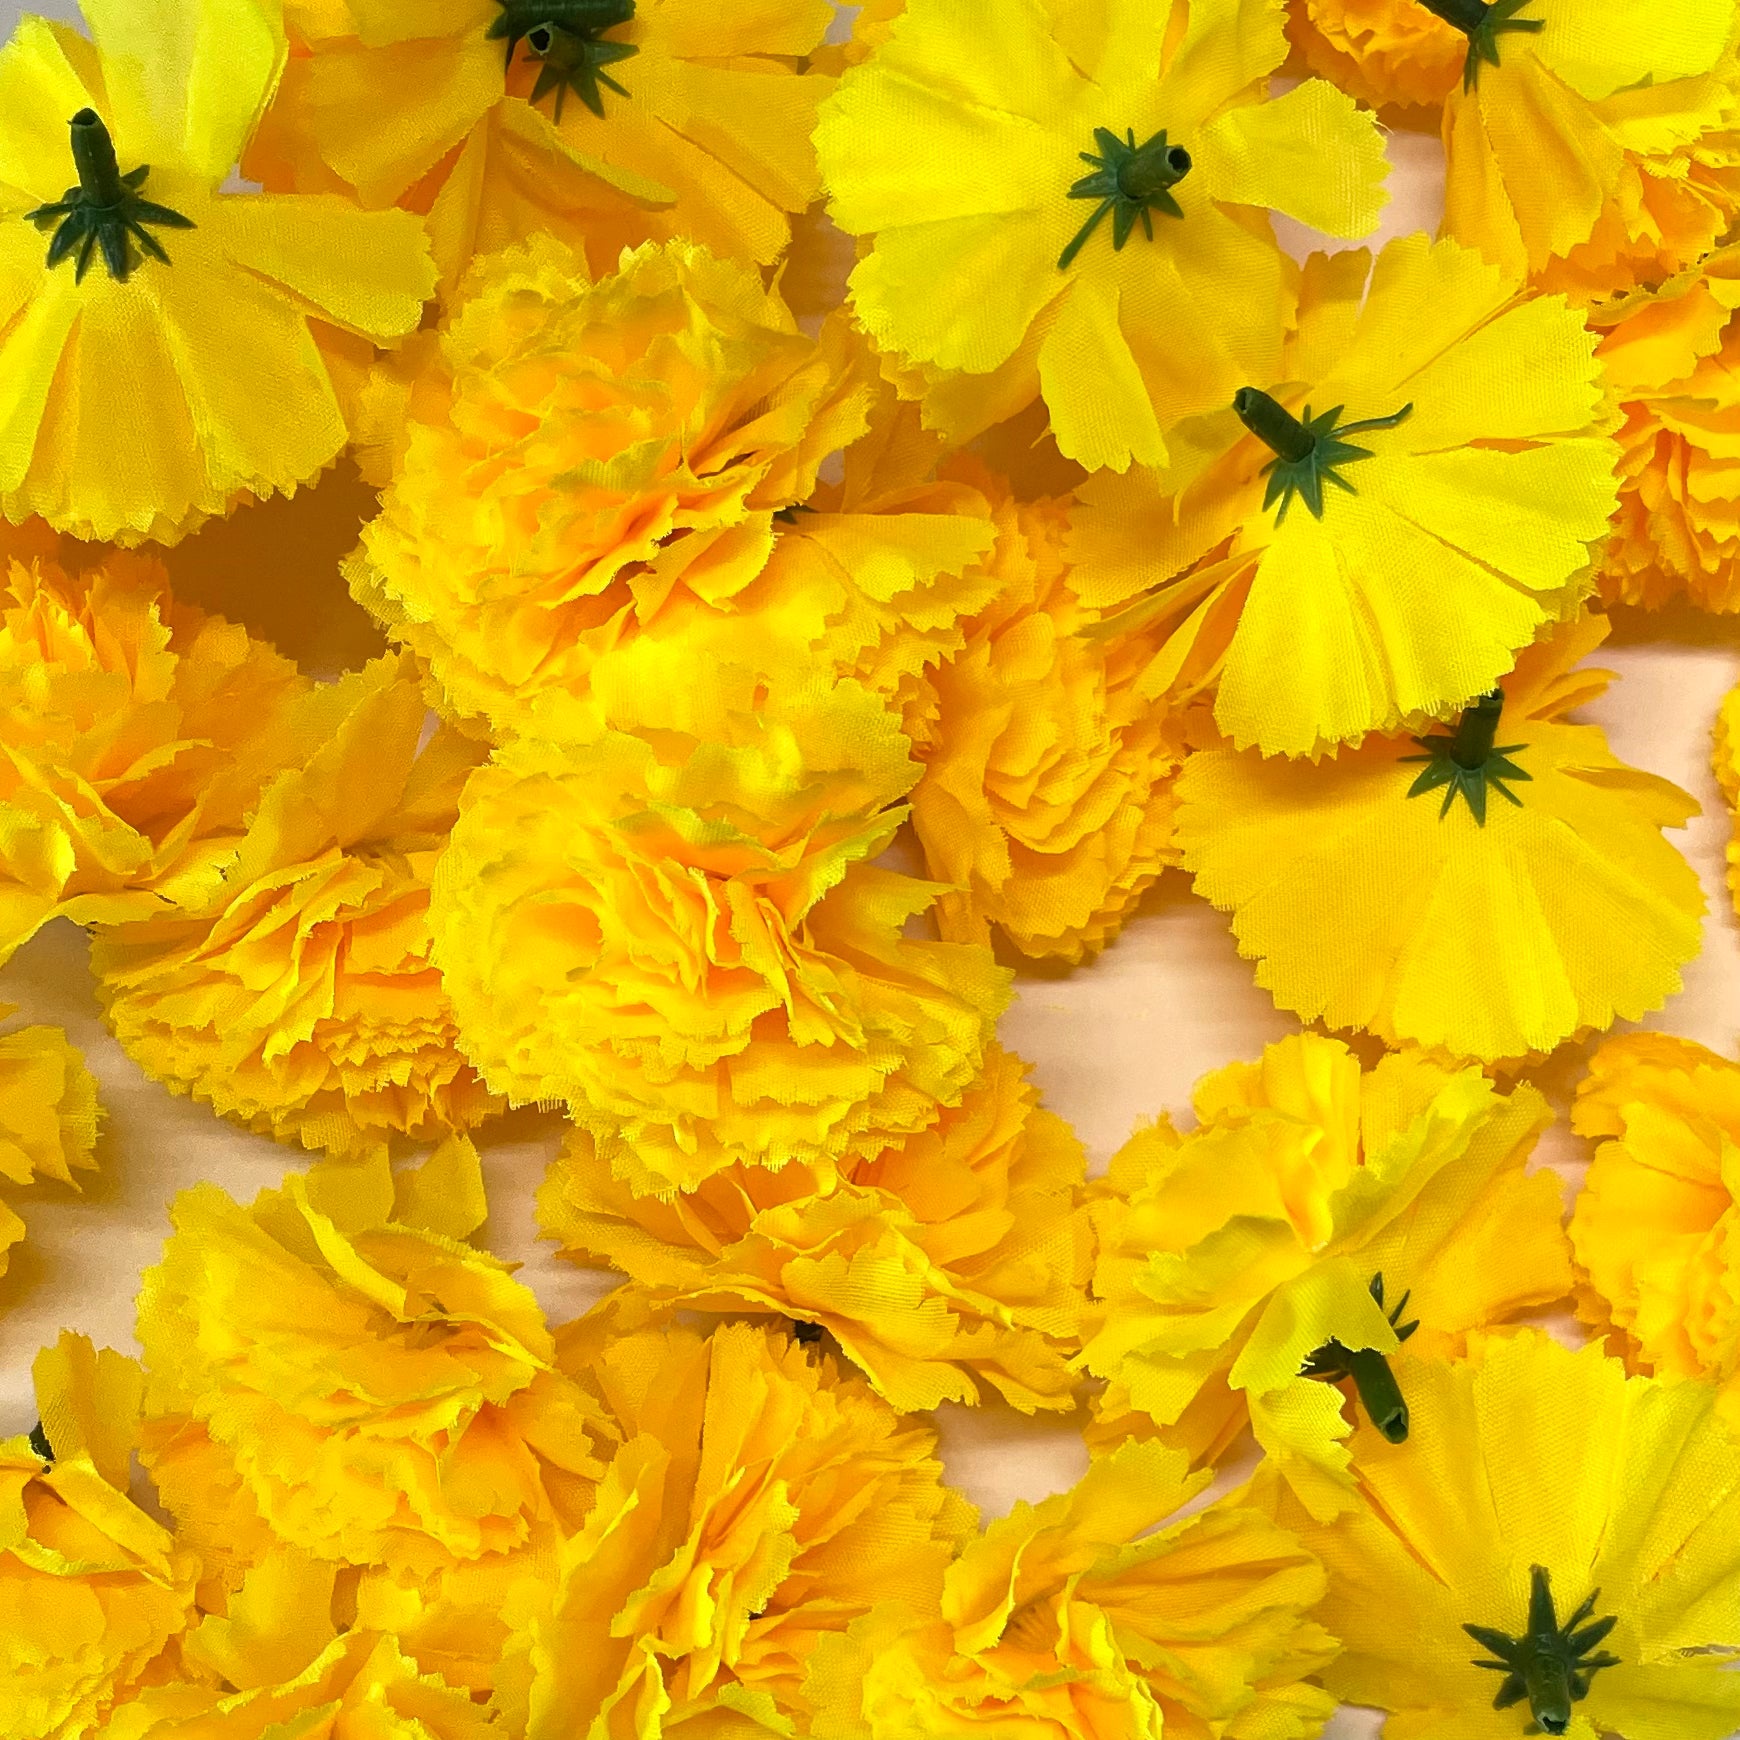 Artificial Silk Flower Heads - Yellow Marigold Style 11 - 10 Pack